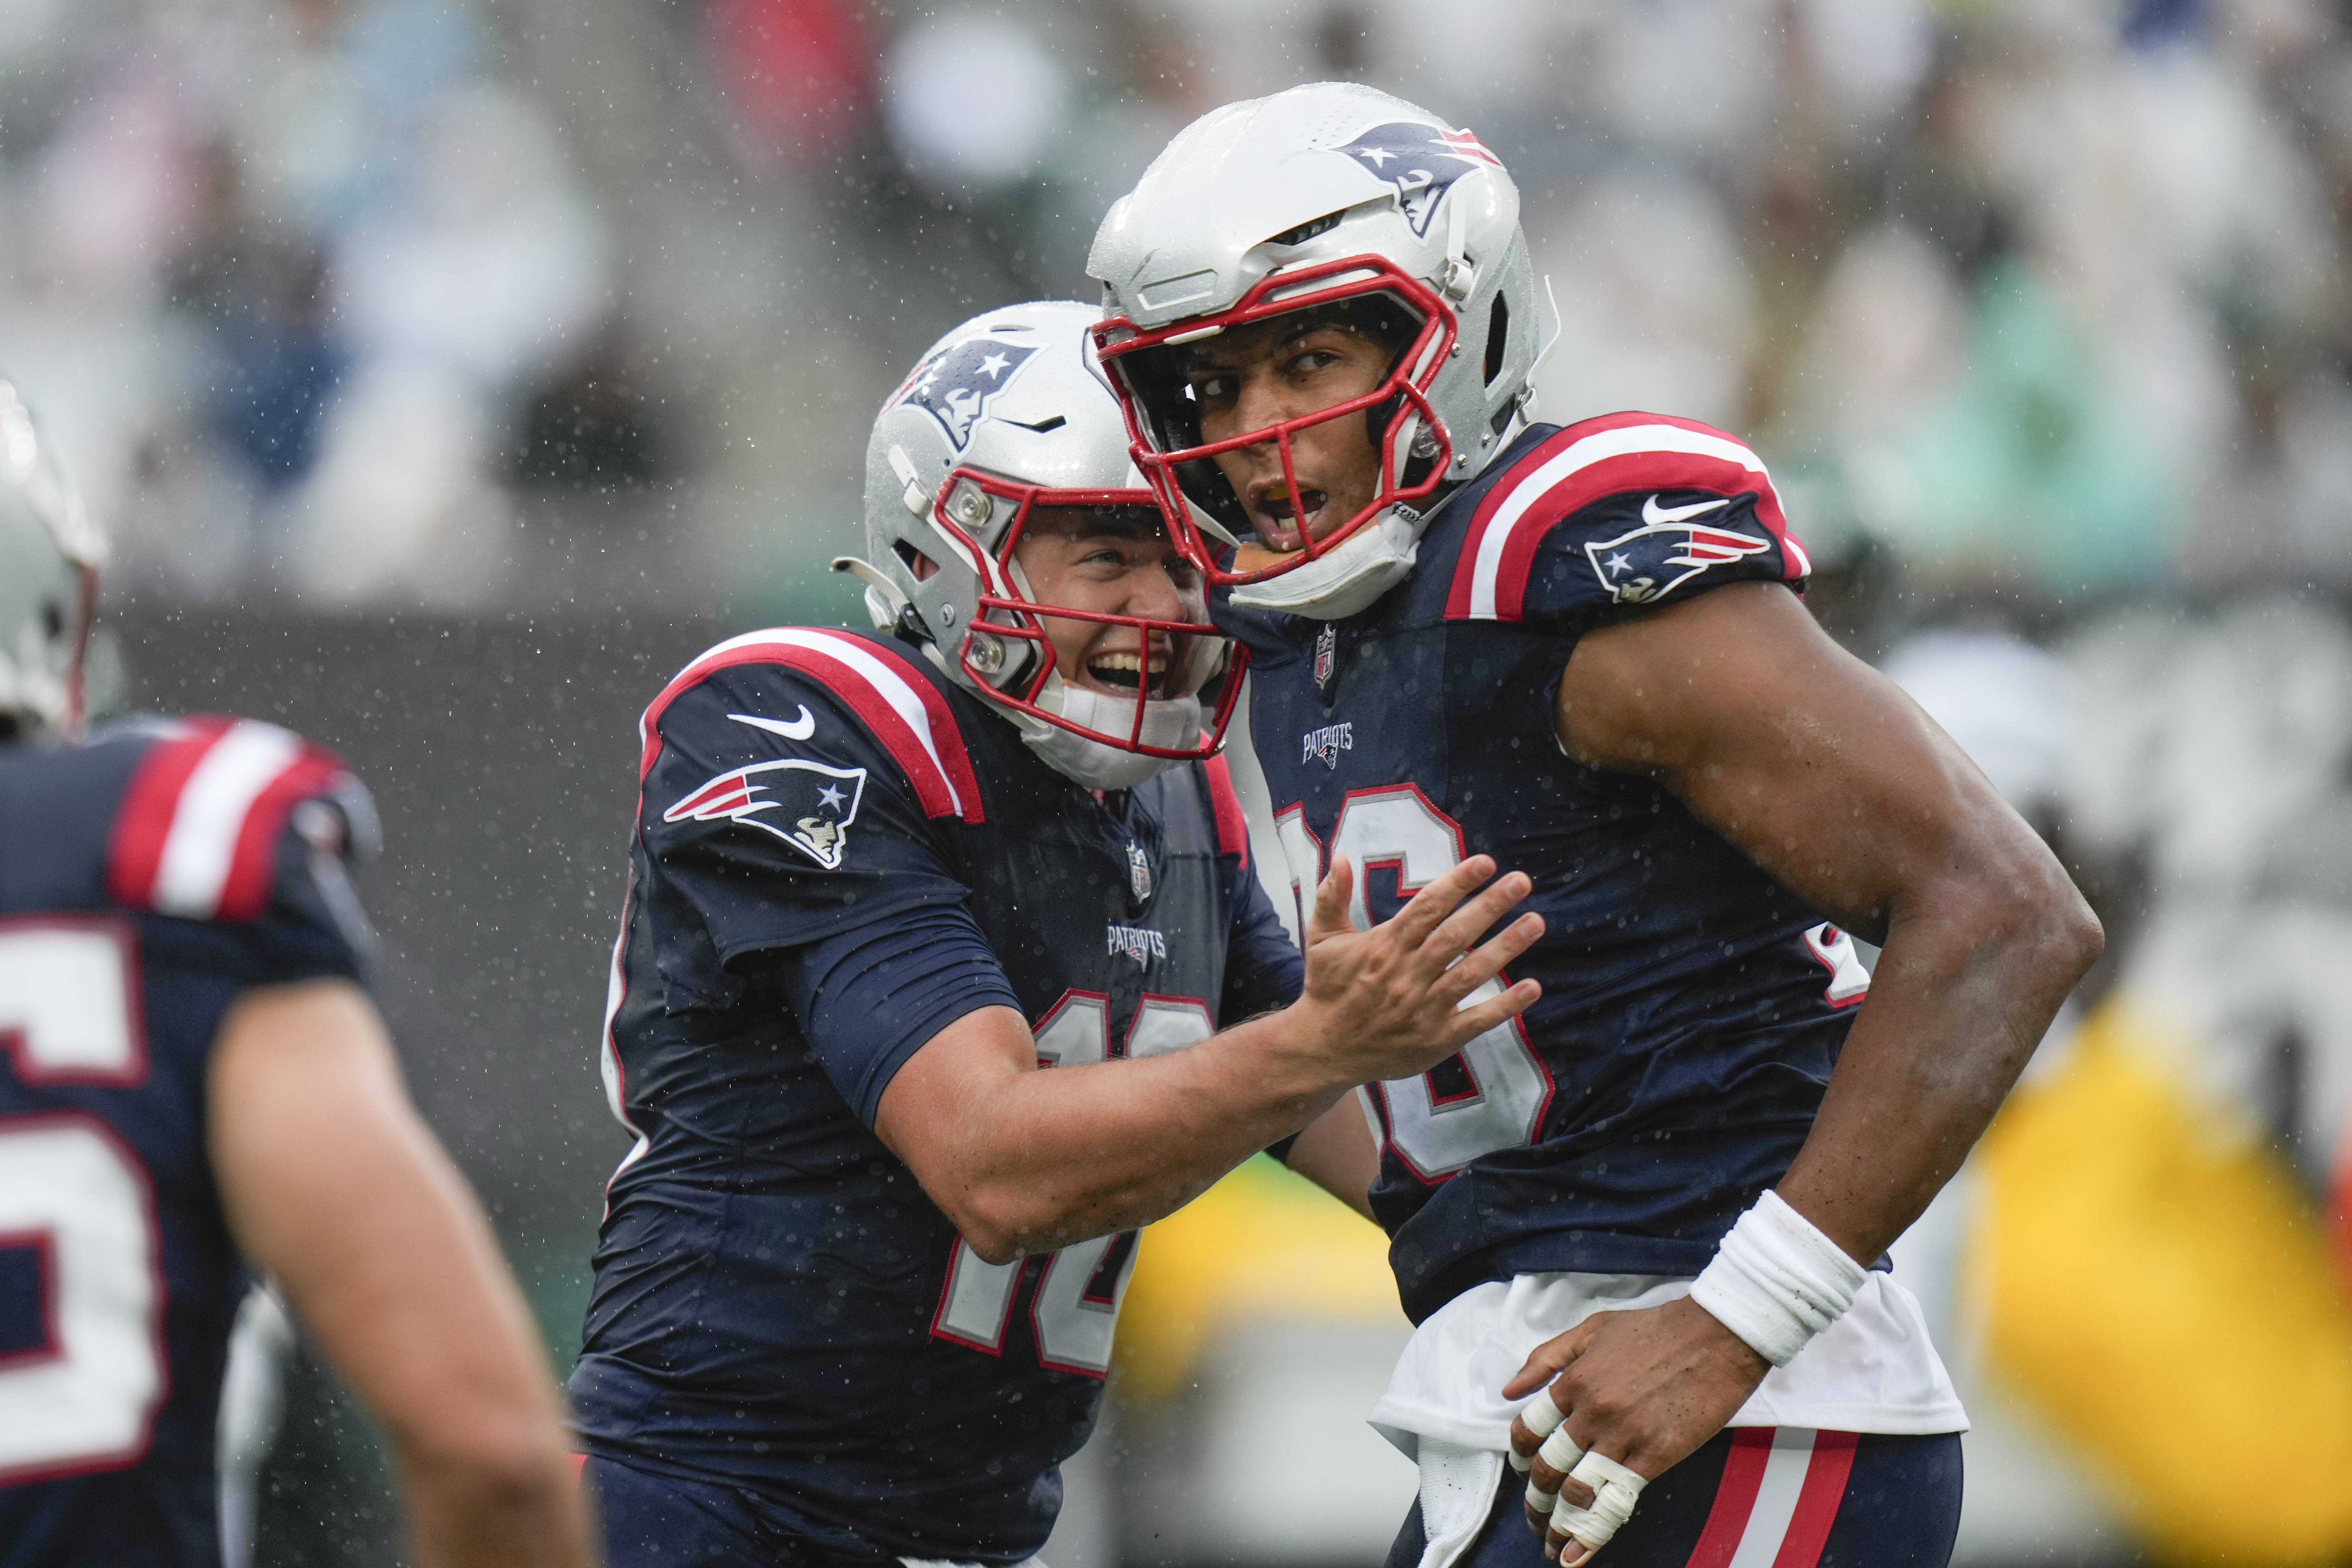 How to Watch the New England Patriots vs. Dallas Cowboys - NFL: Week 4